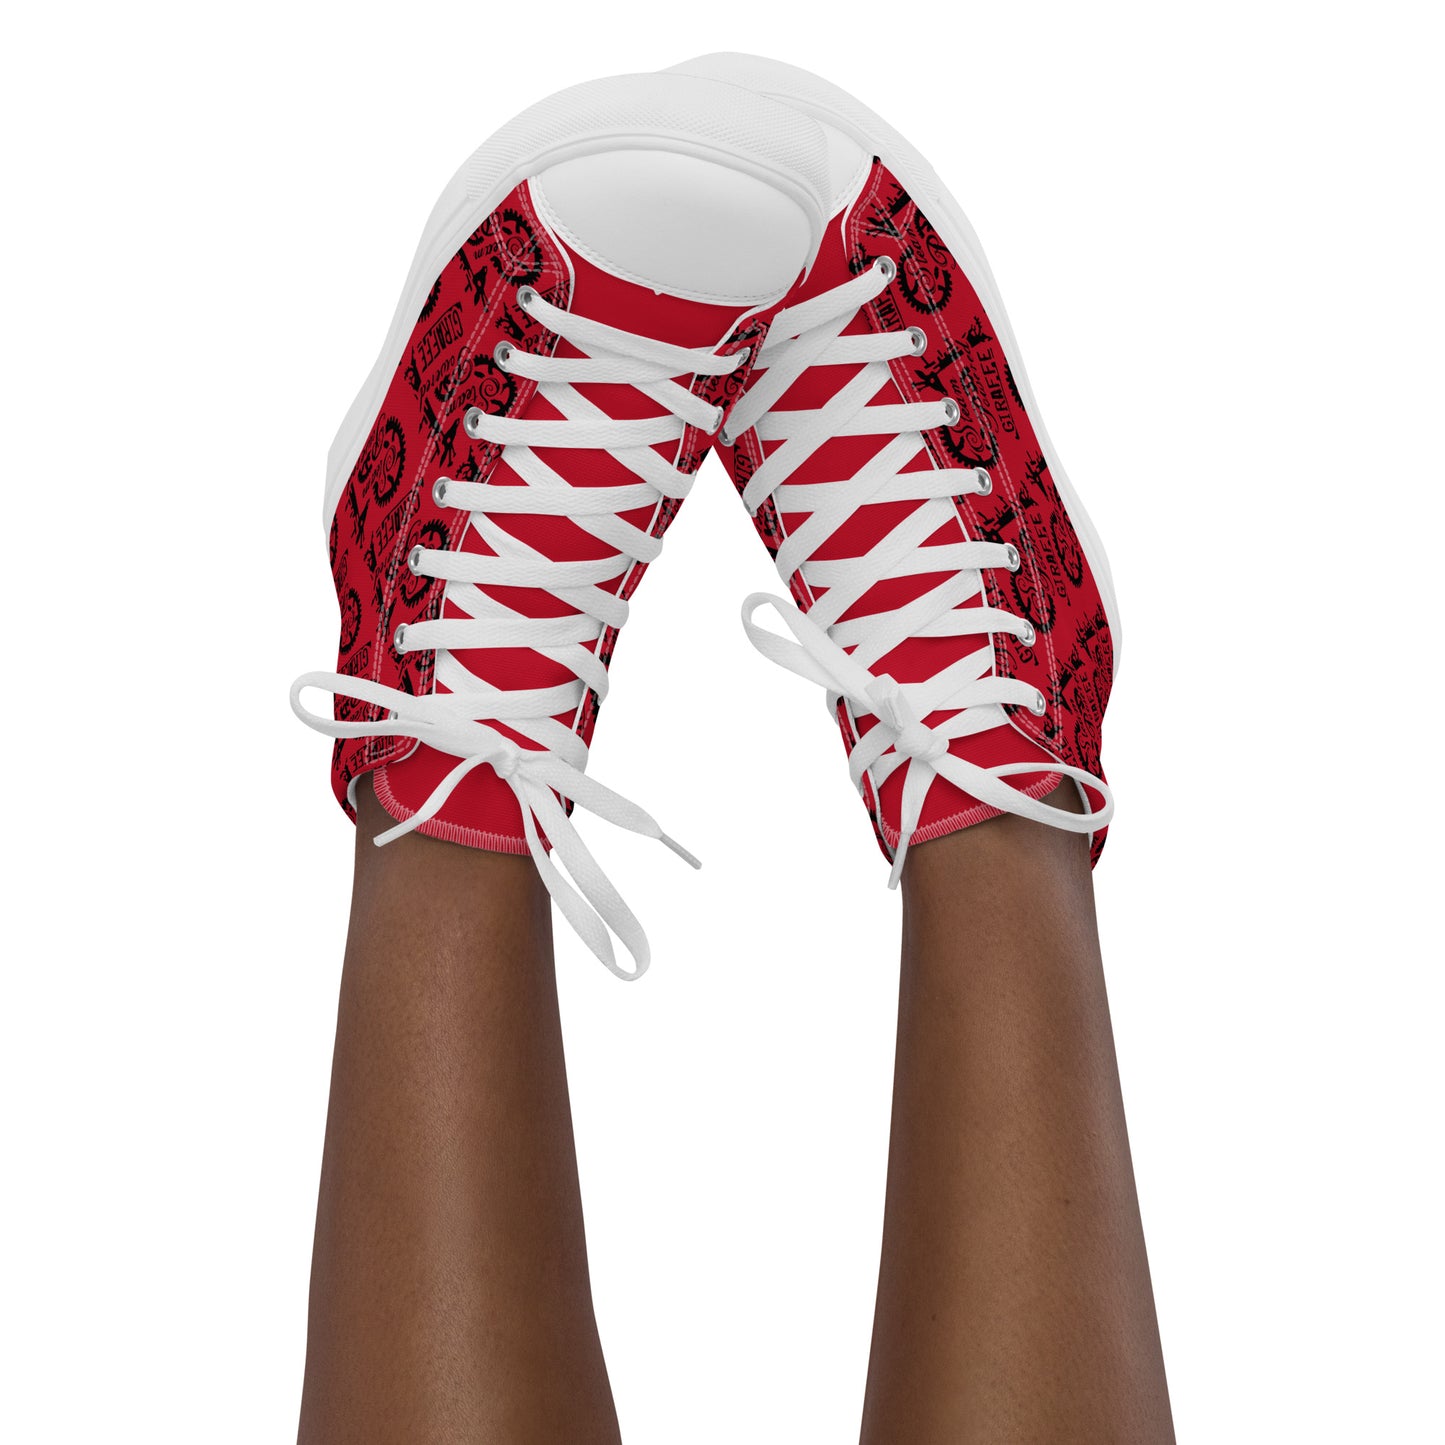 Women’s Red SPG Logo High Top Shoes